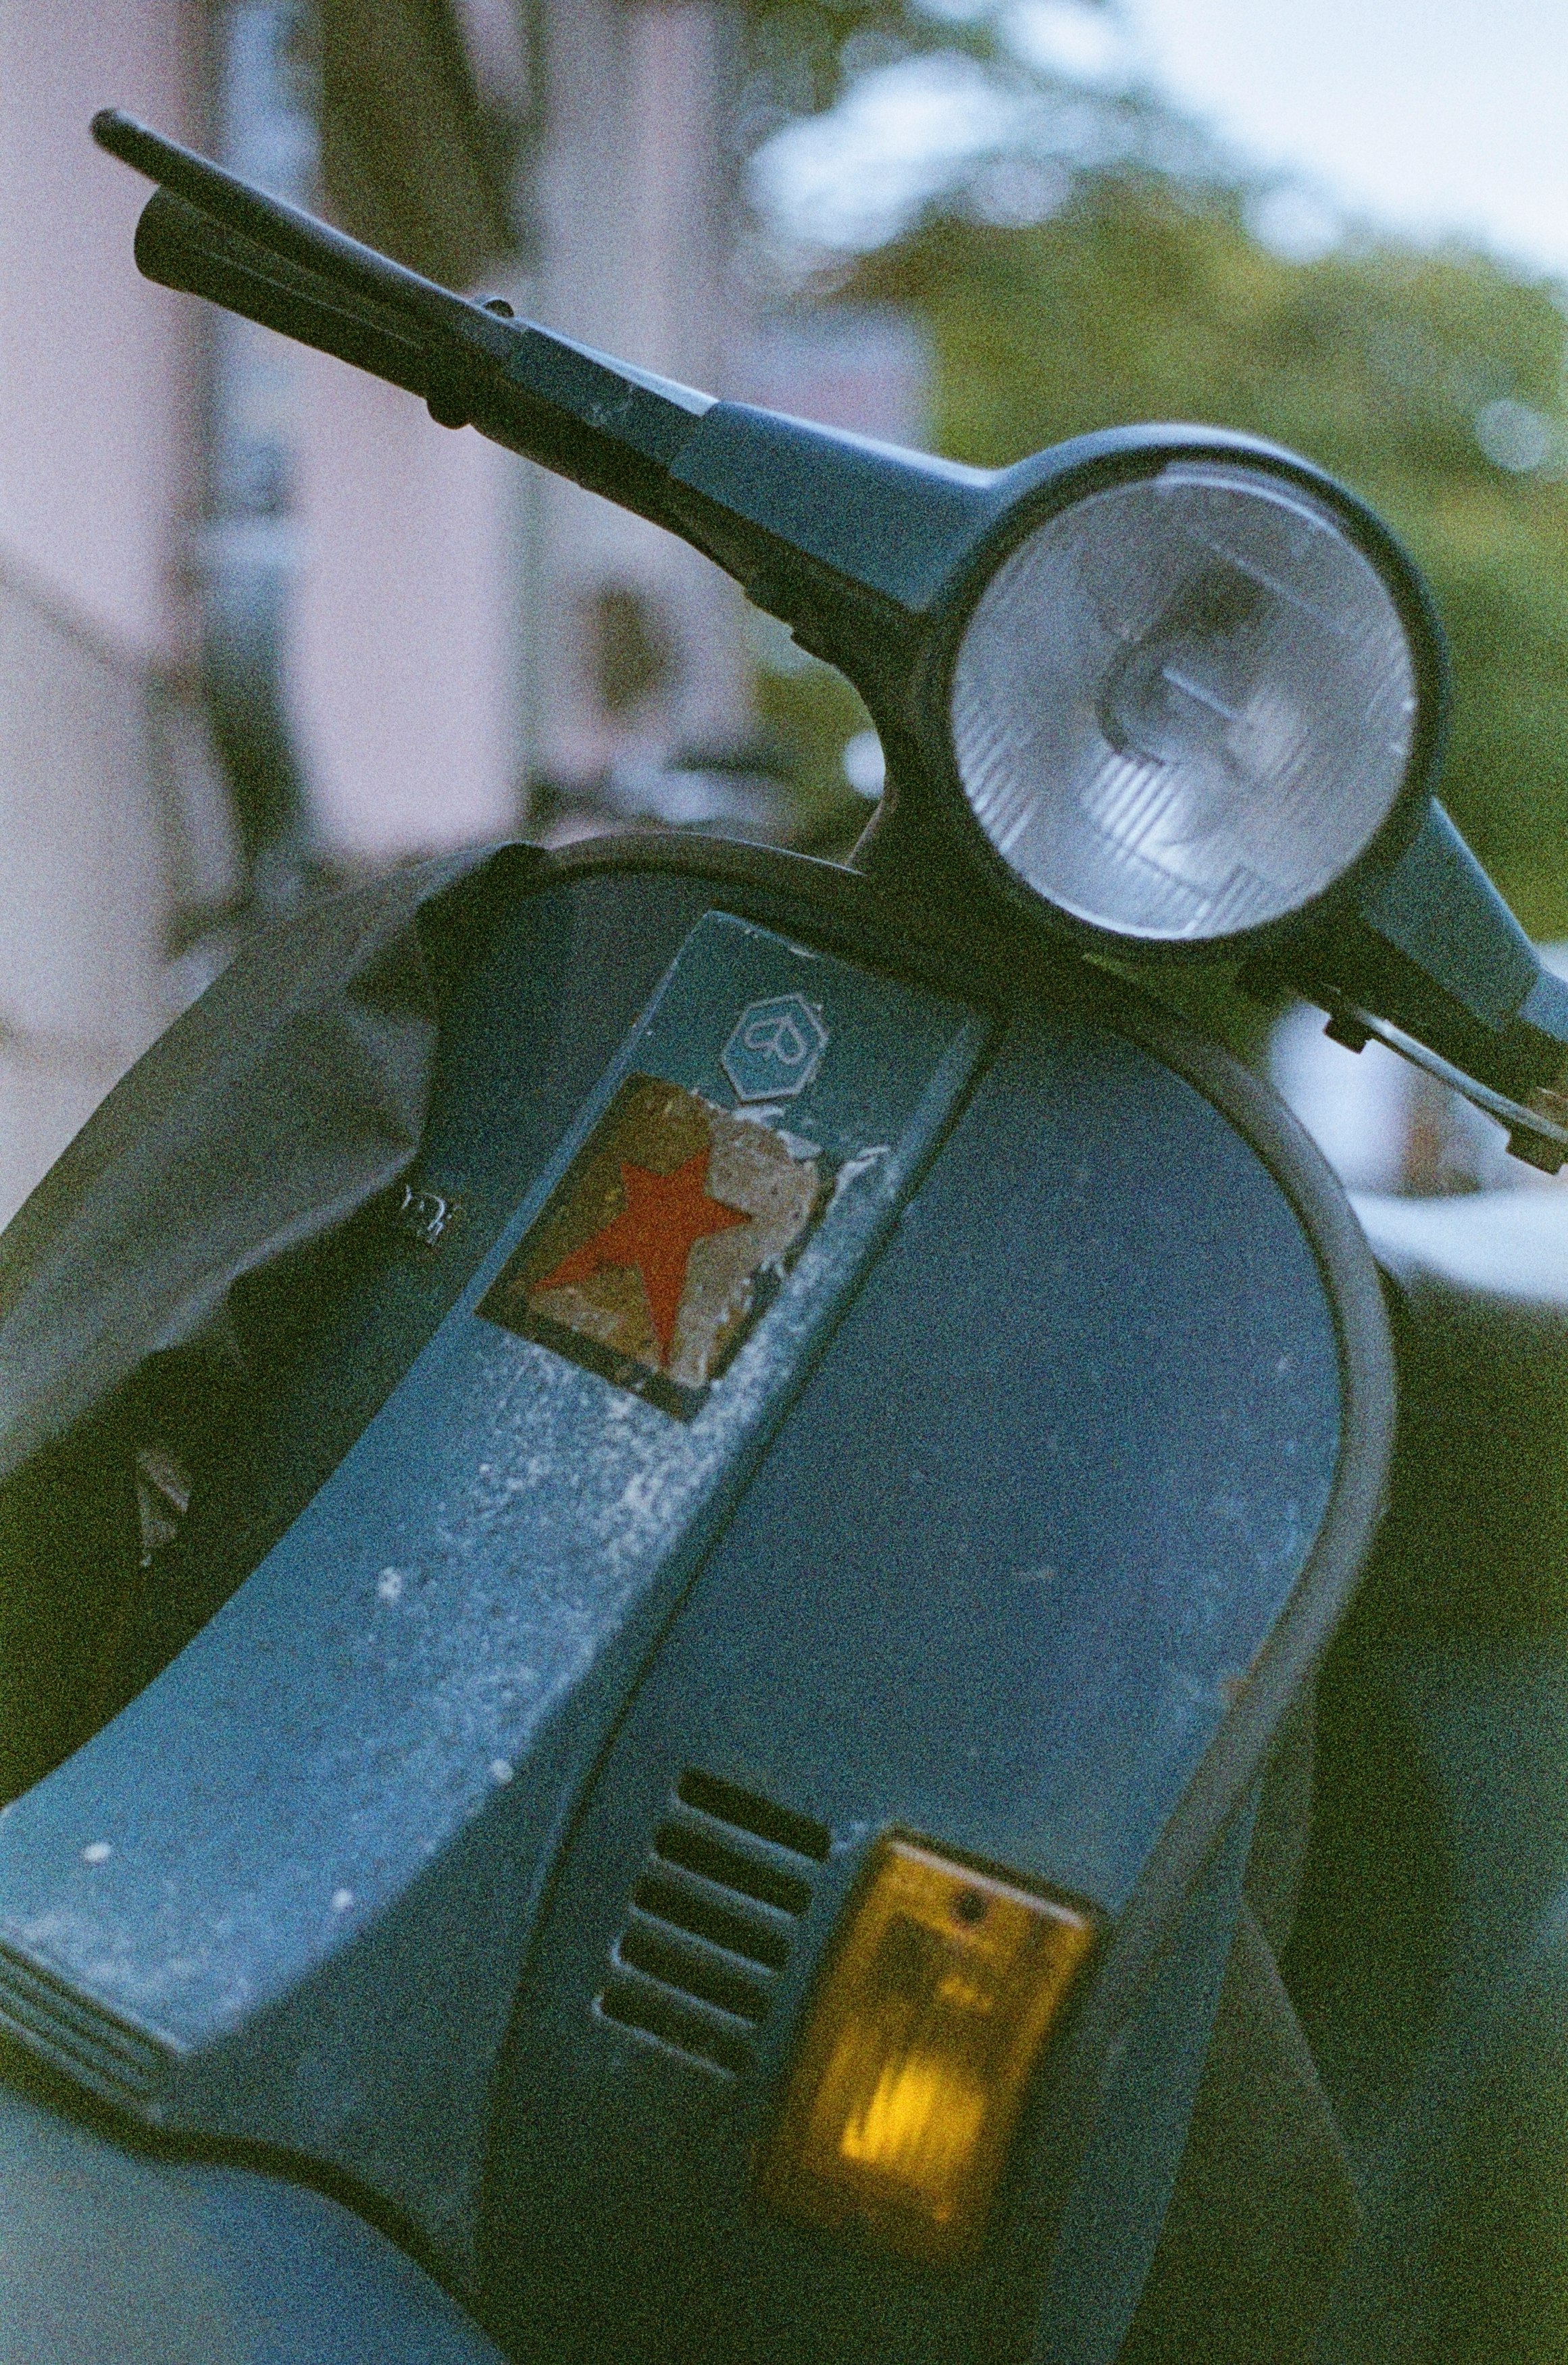 blue and black motorcycle with red and white sticker